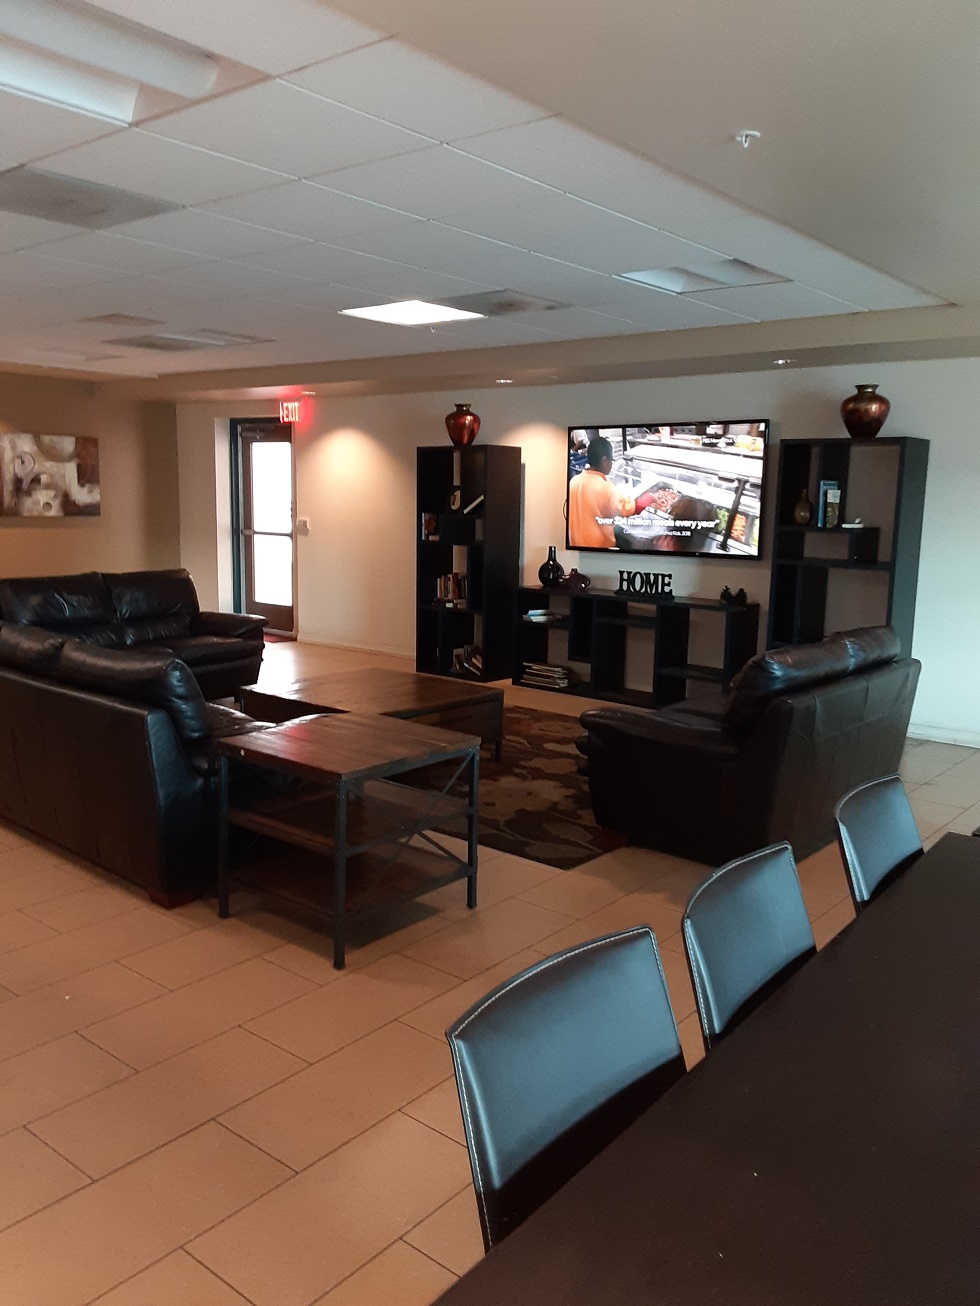 image of gateways common area. three sofas in front of tv that is mounted on wall. large entertainment center.